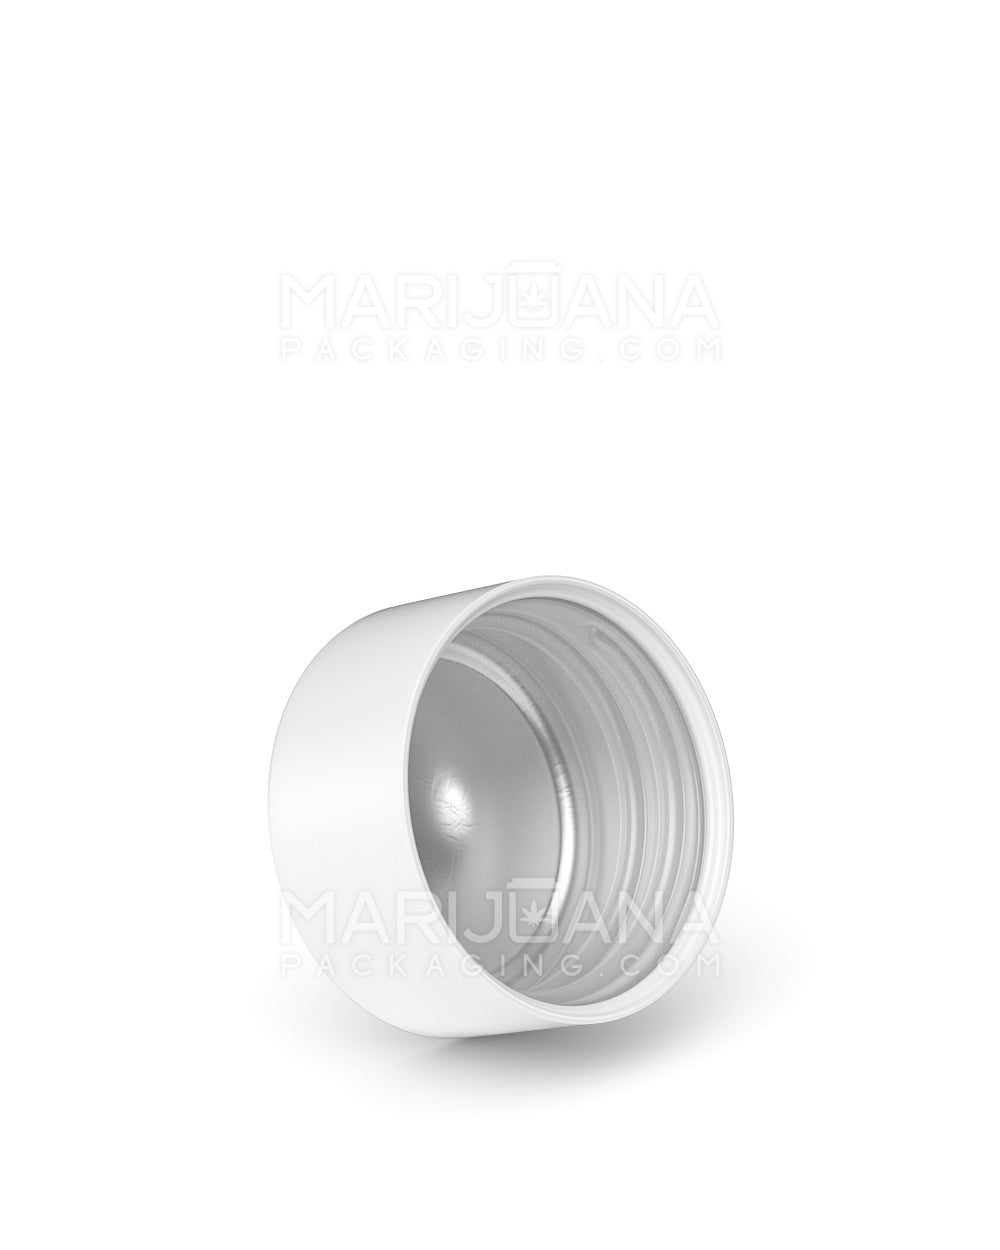 Child Resistant | Smooth Push Down & Turn Plastic Caps w/ Foil Liner | 28mm - Matte White - 504 Count - 2